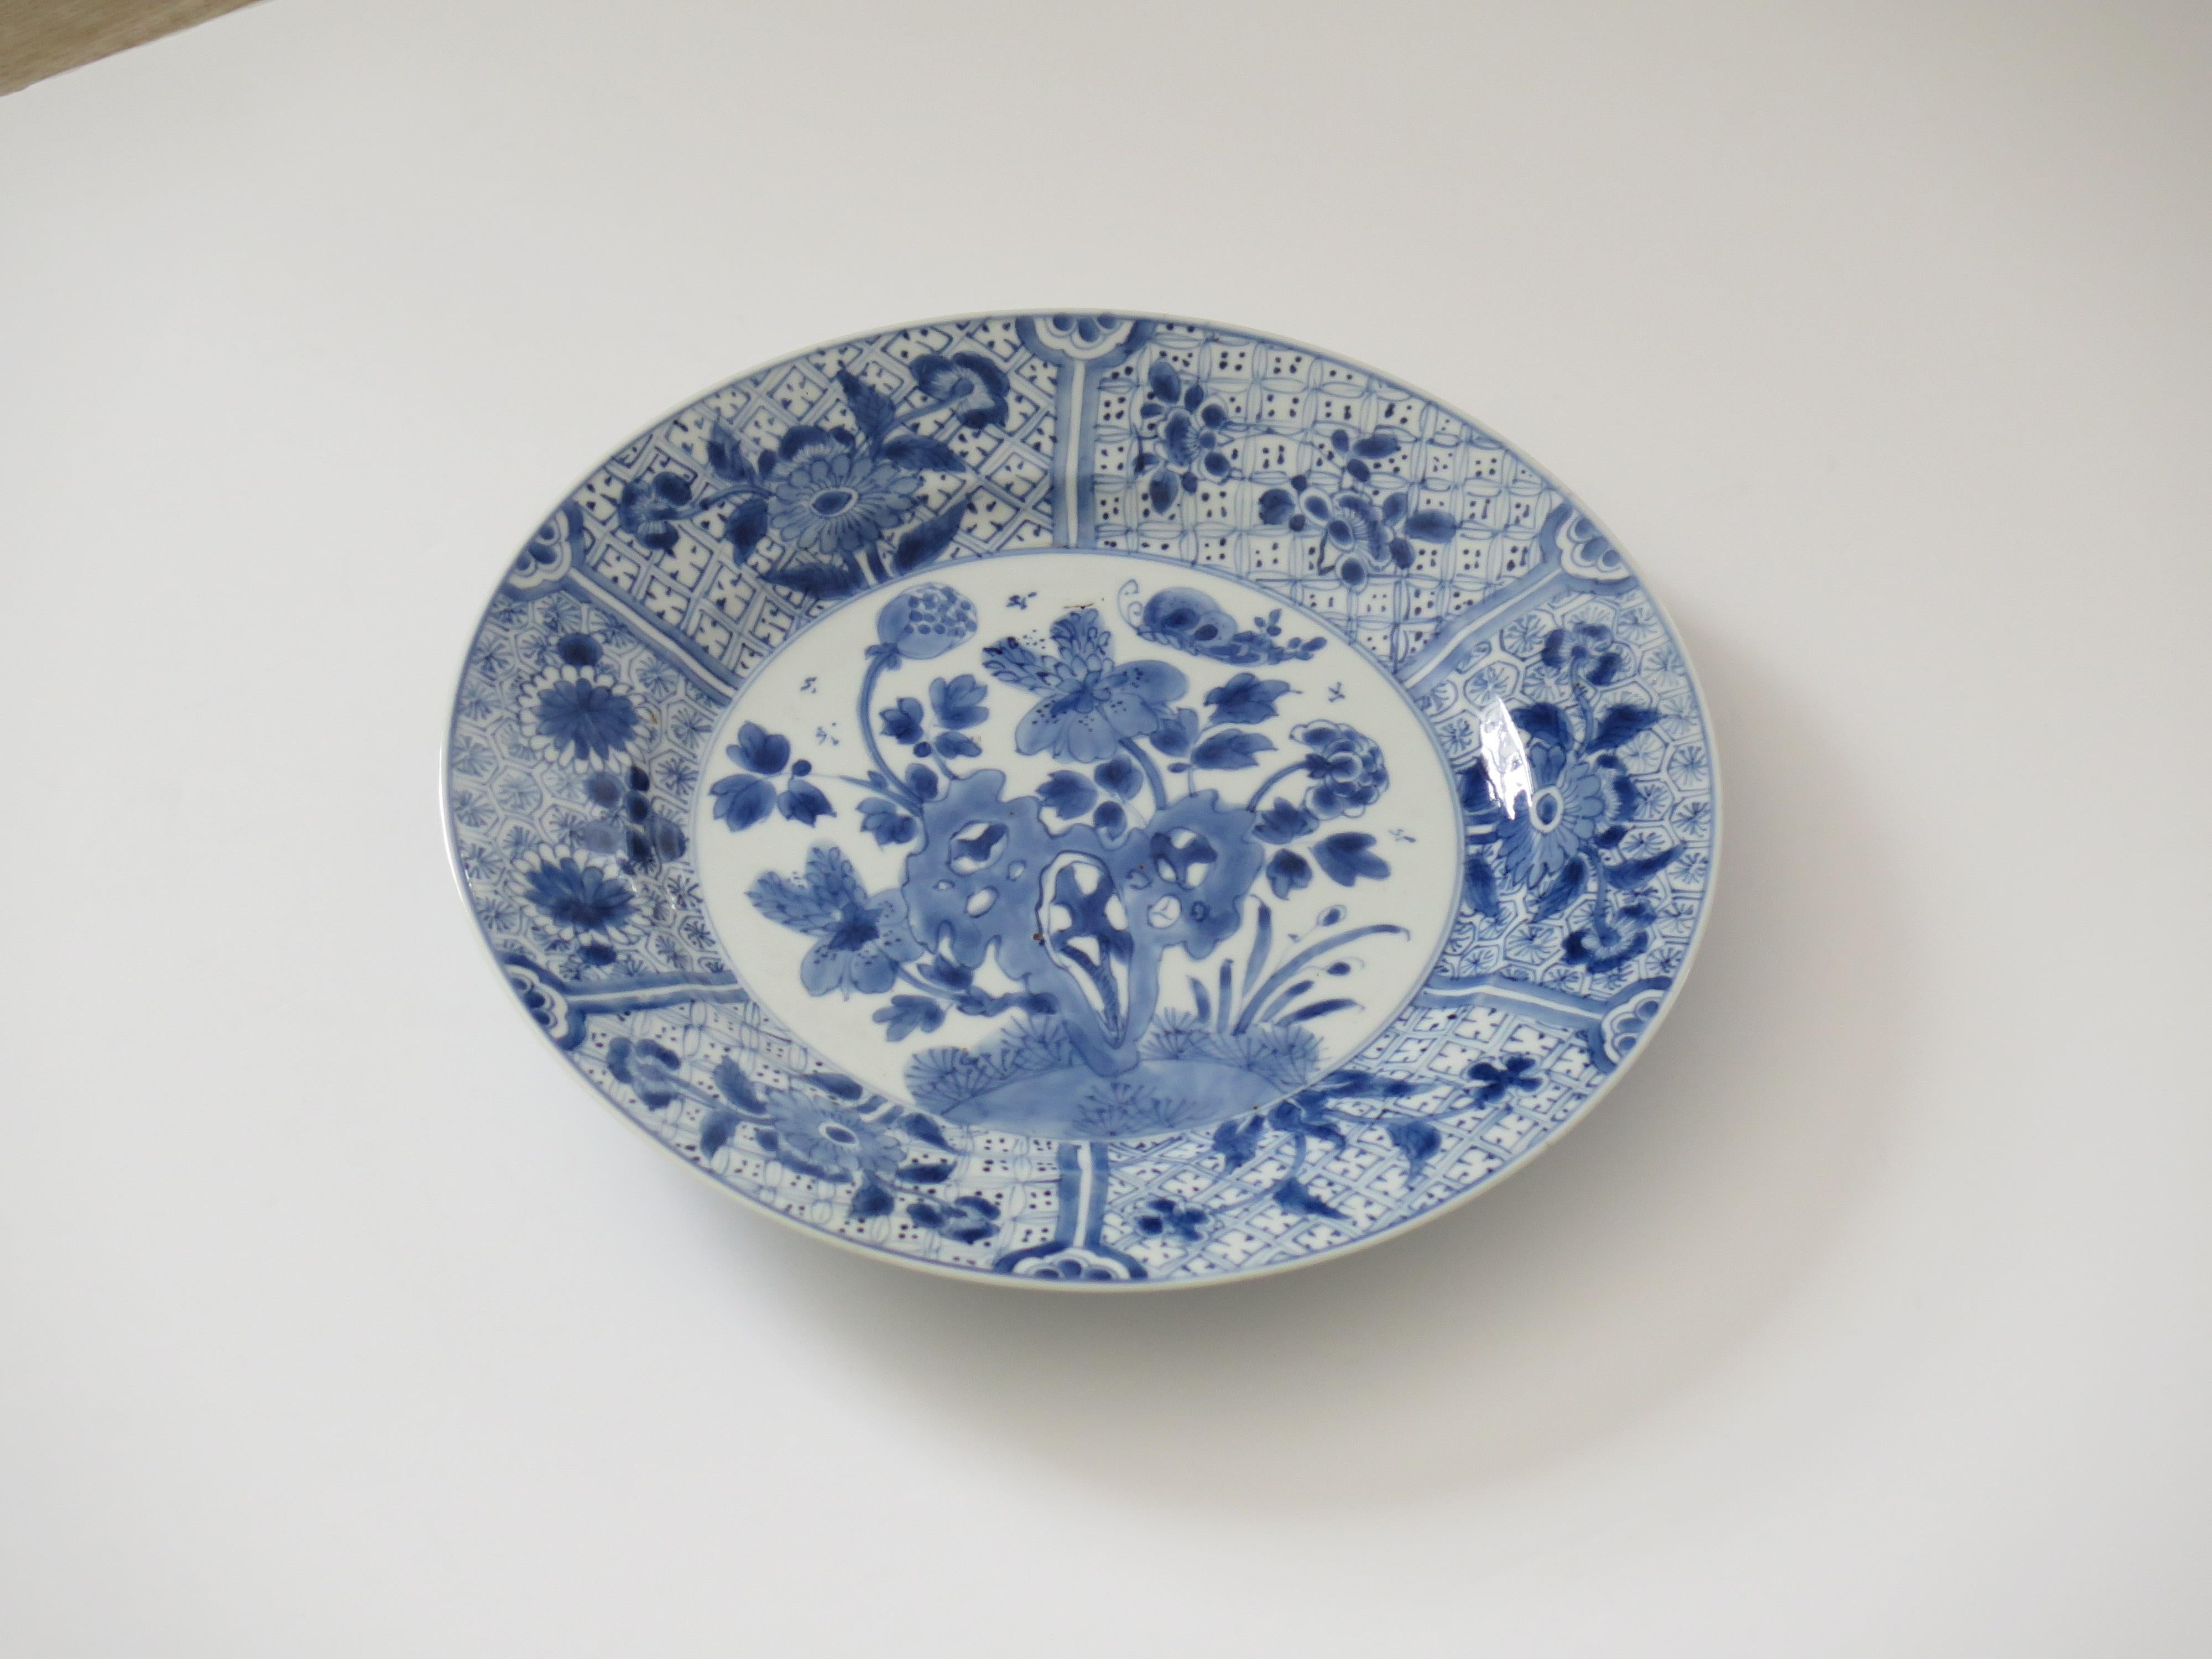 Chinese Kangxi Mark & period Plate or Dish Porcelain Blue & White, Ca 1700 For Sale 6